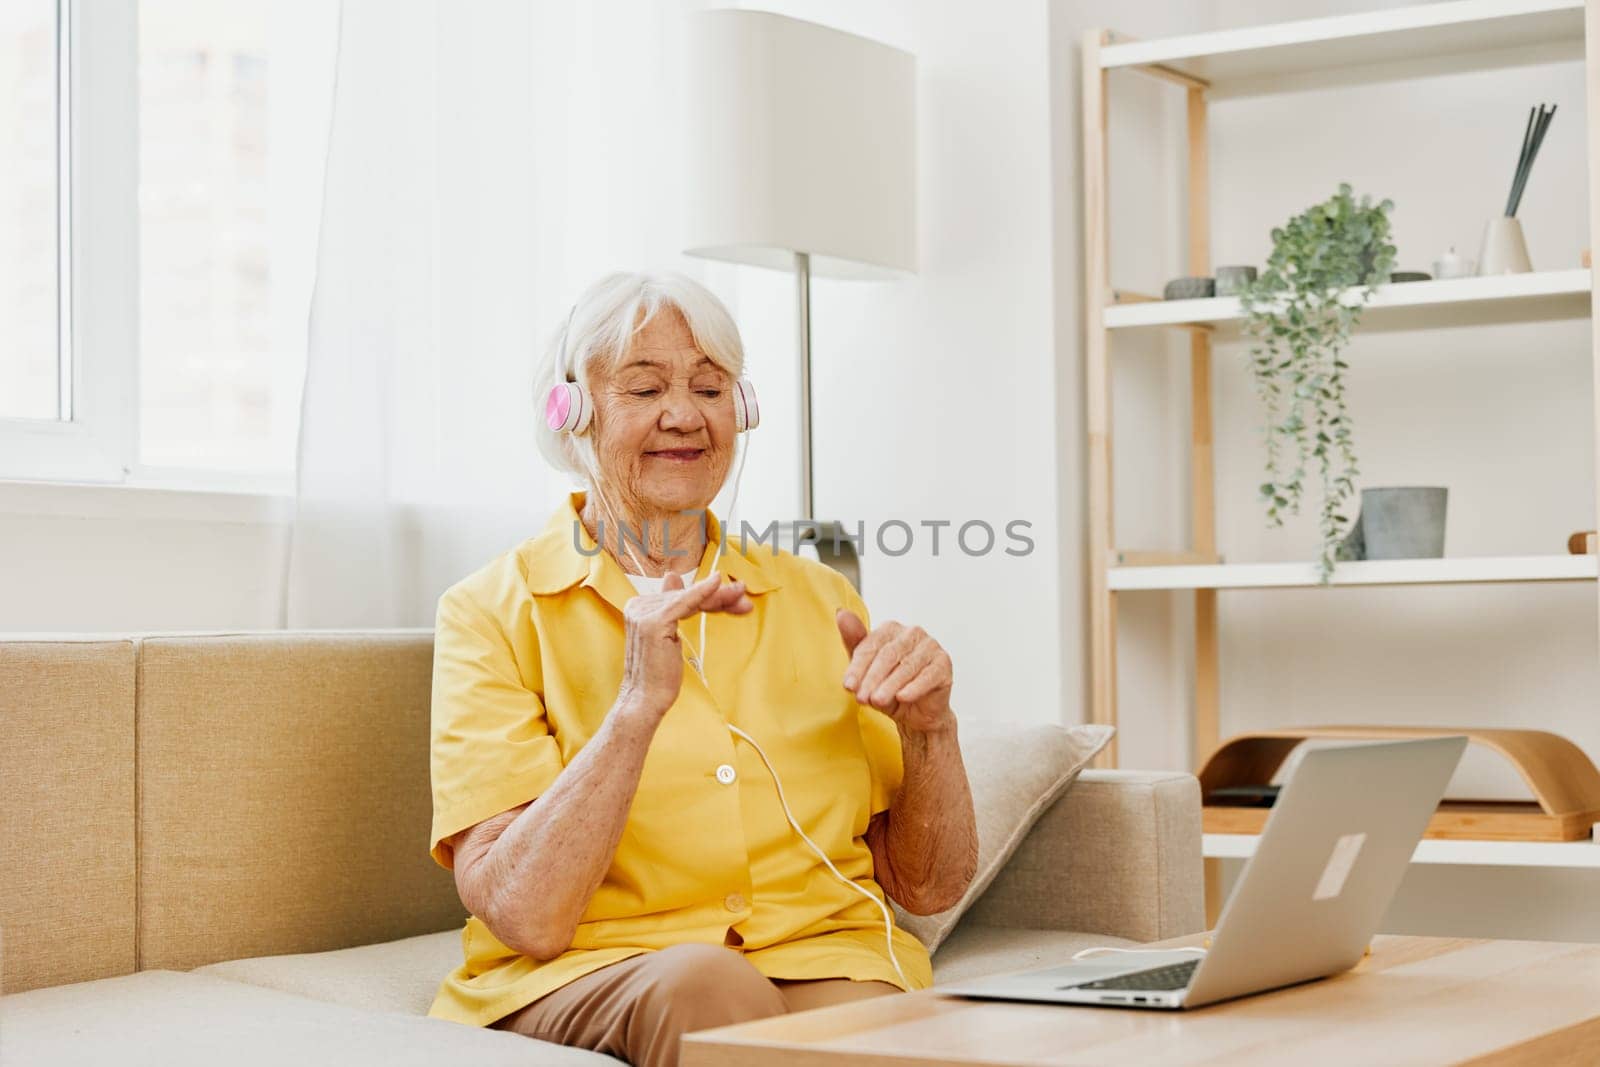 An elderly woman wearing headphones with a laptop communicating online by video call, sitting on the couch at home and working in a yellow shirt in front of a window, the lifestyle of a retired woman. by SHOTPRIME